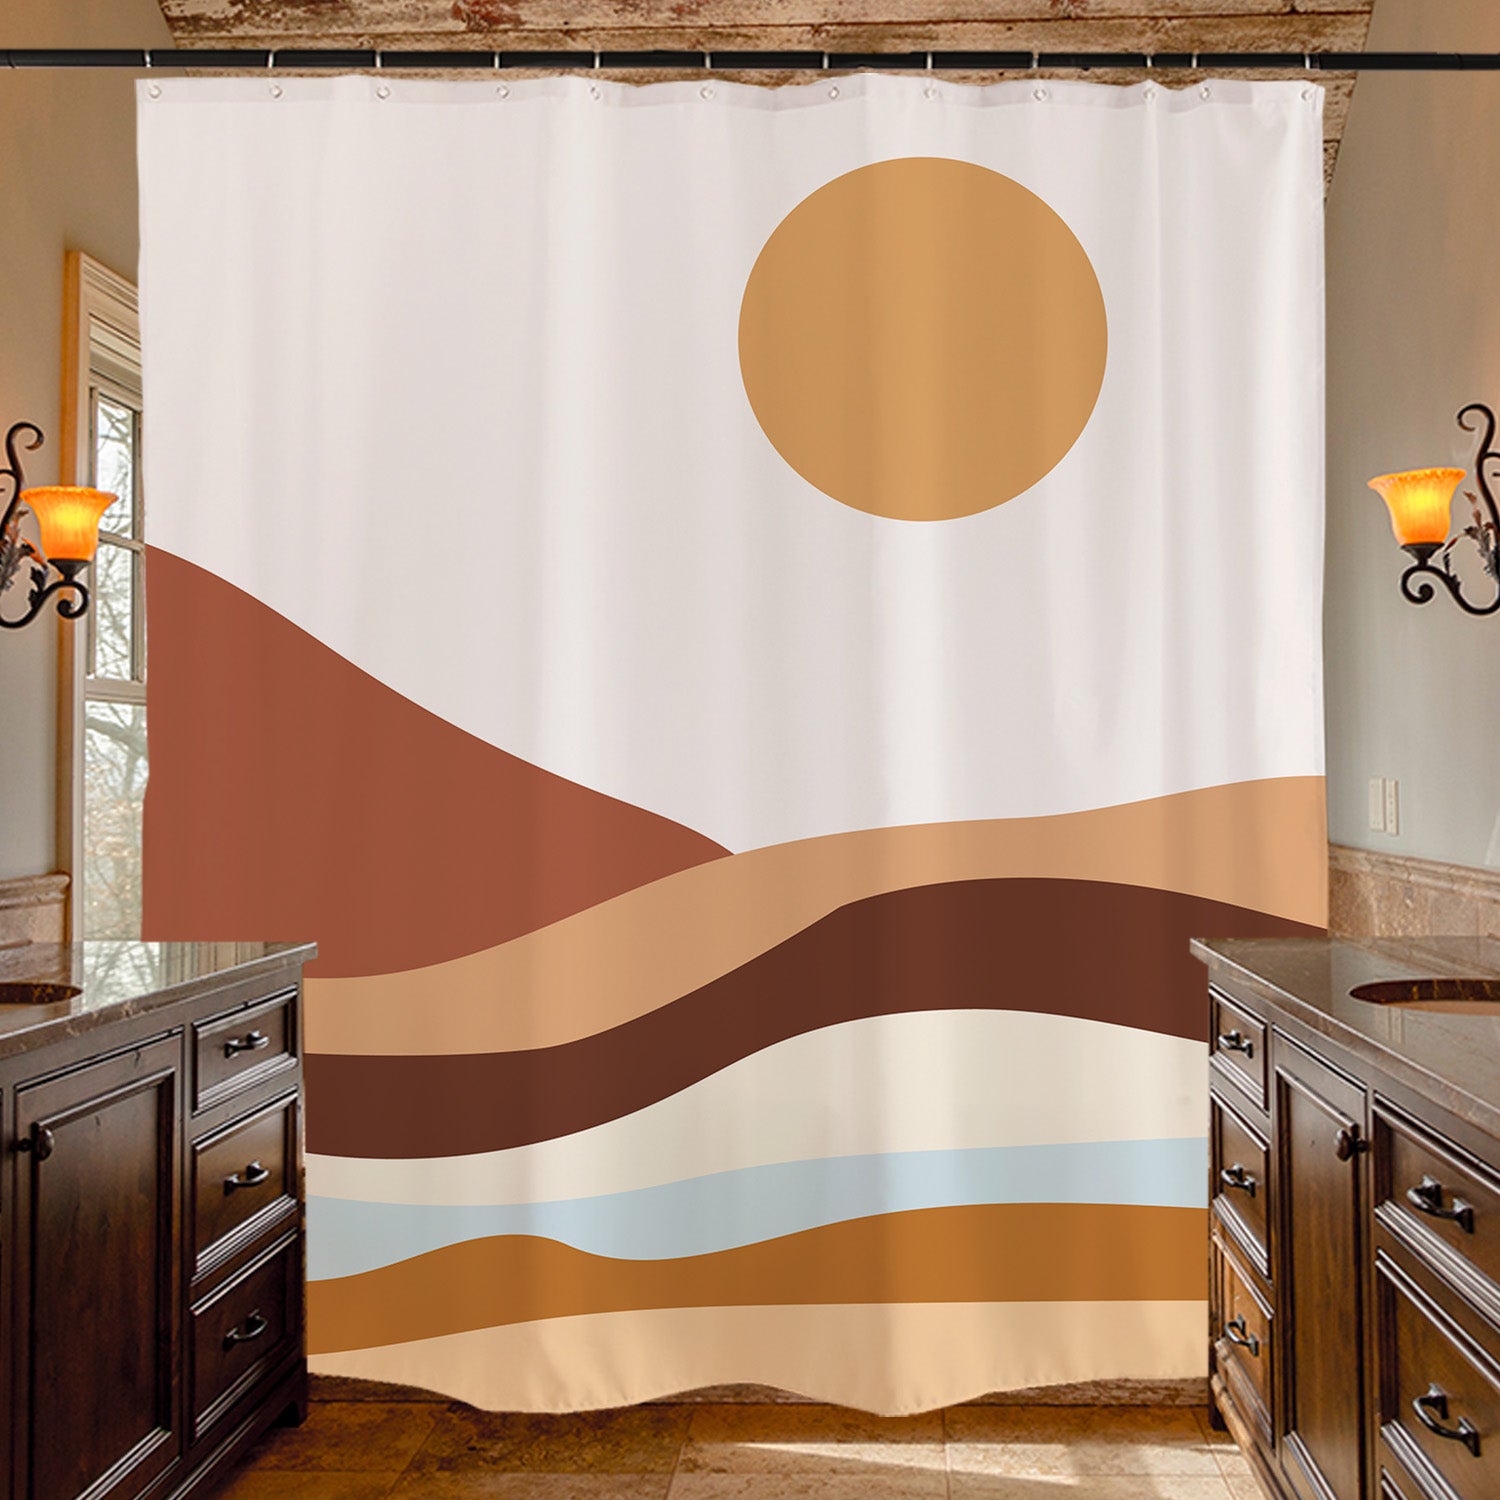 Feblilac Orange Mountains and Rivers Sunrise Shower Curtain with Hooks